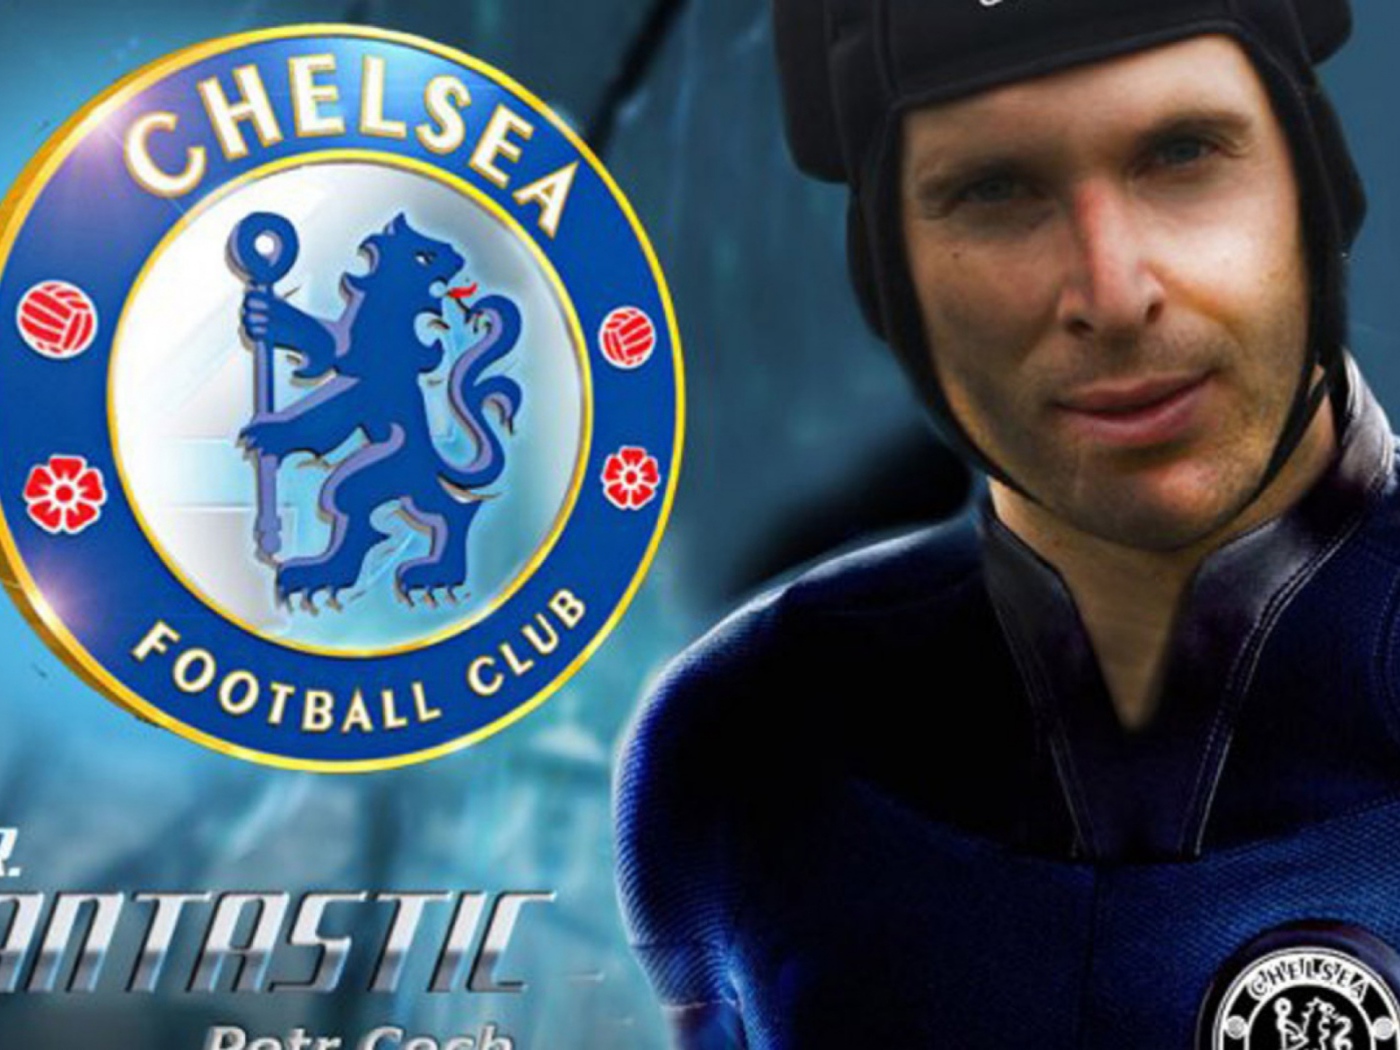 The football player Chelsea Petr Cech always in the helmet